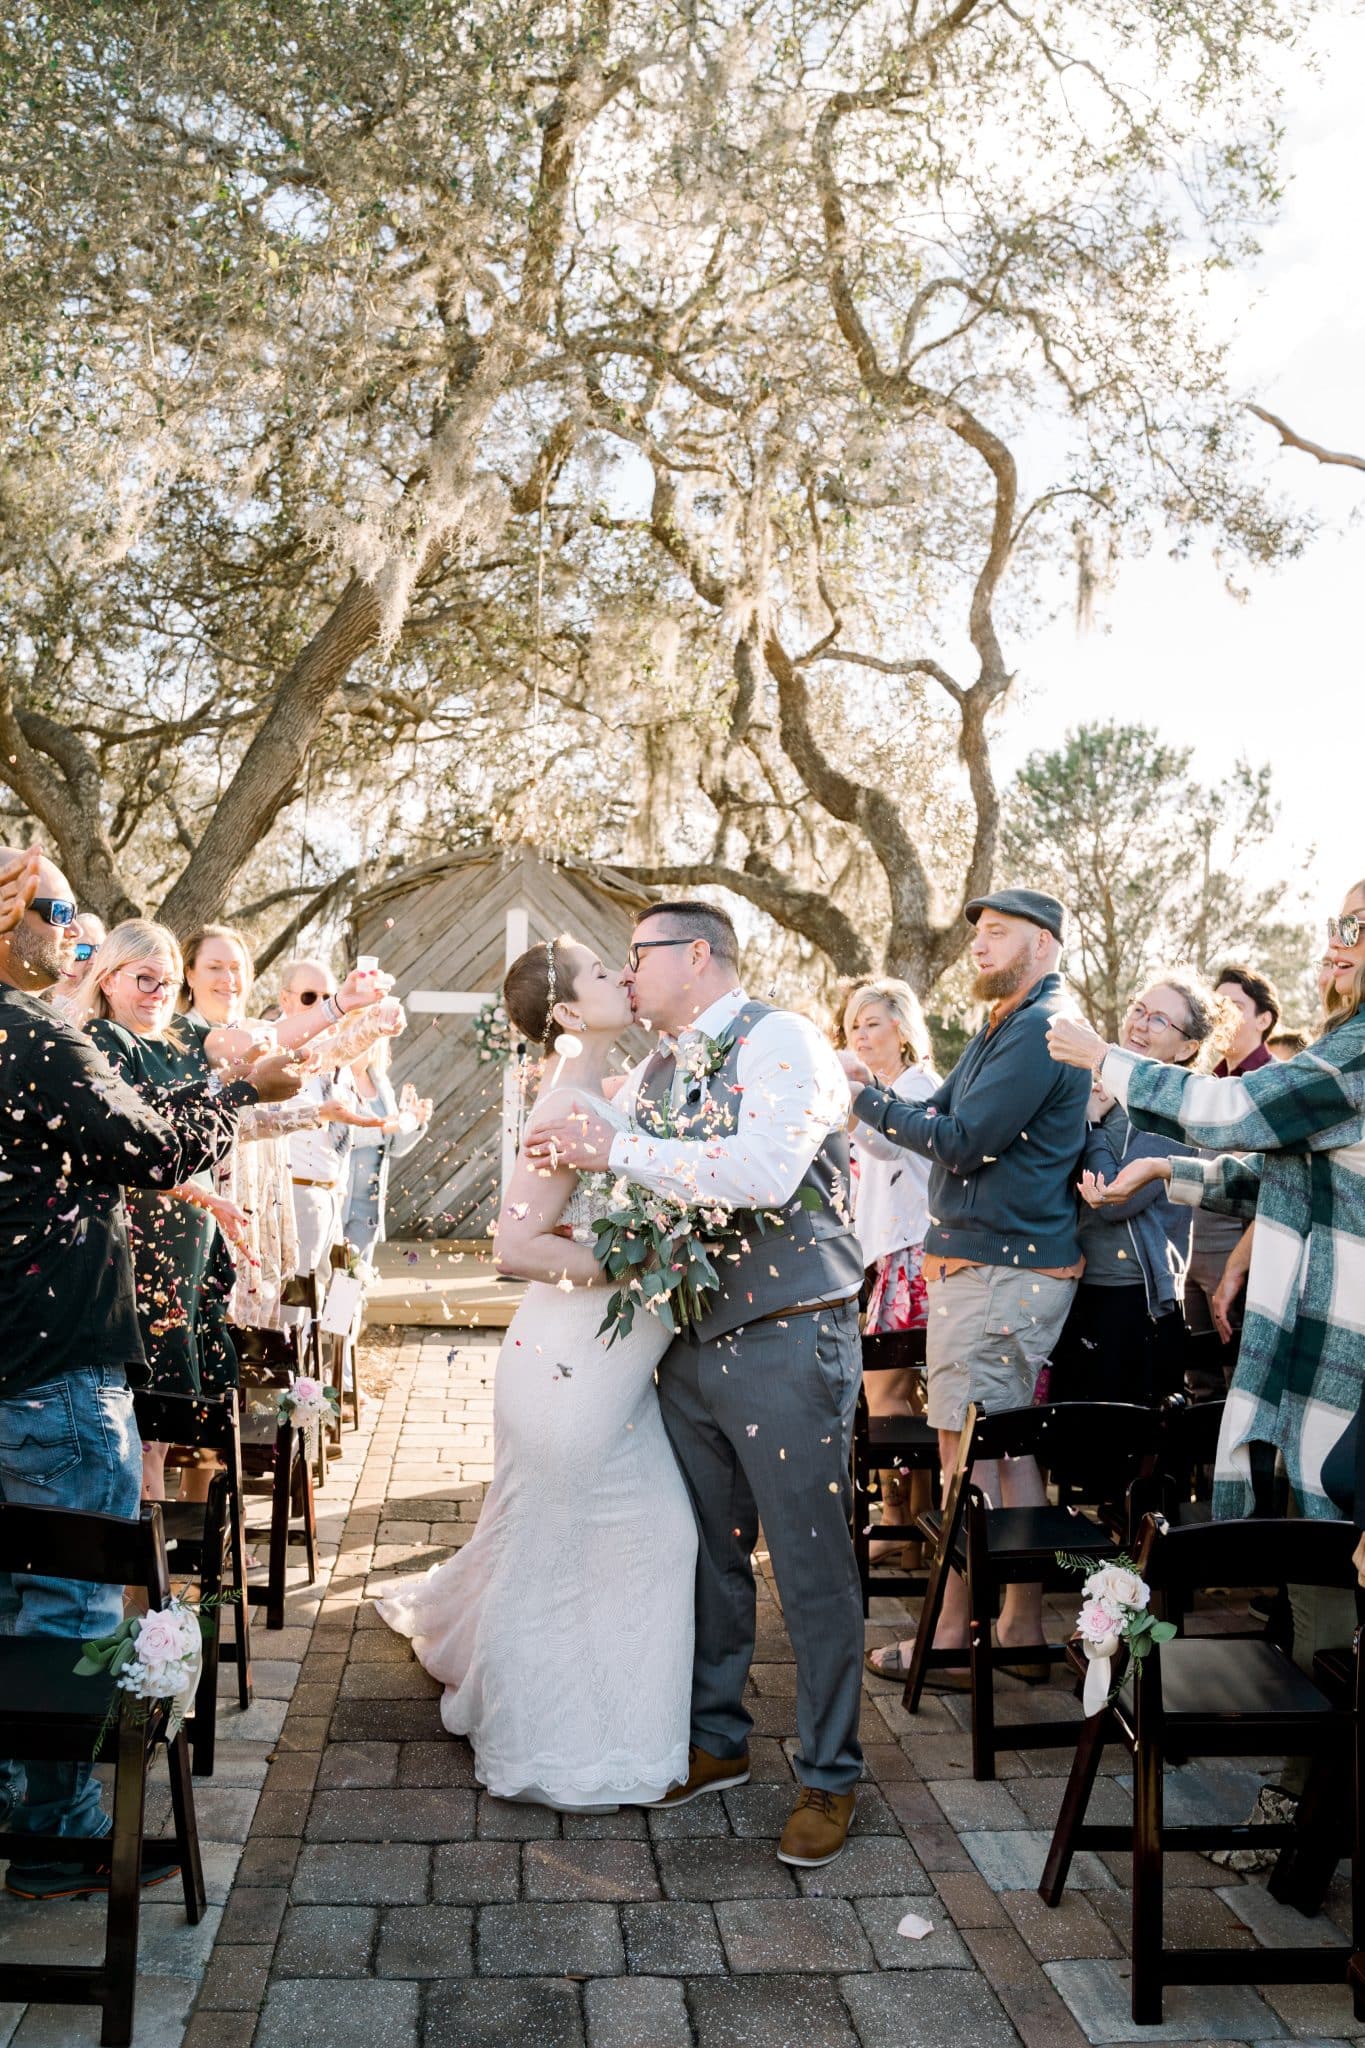 After the wedding vow renewal ceremony, the couple kisses as guests throw confetti.